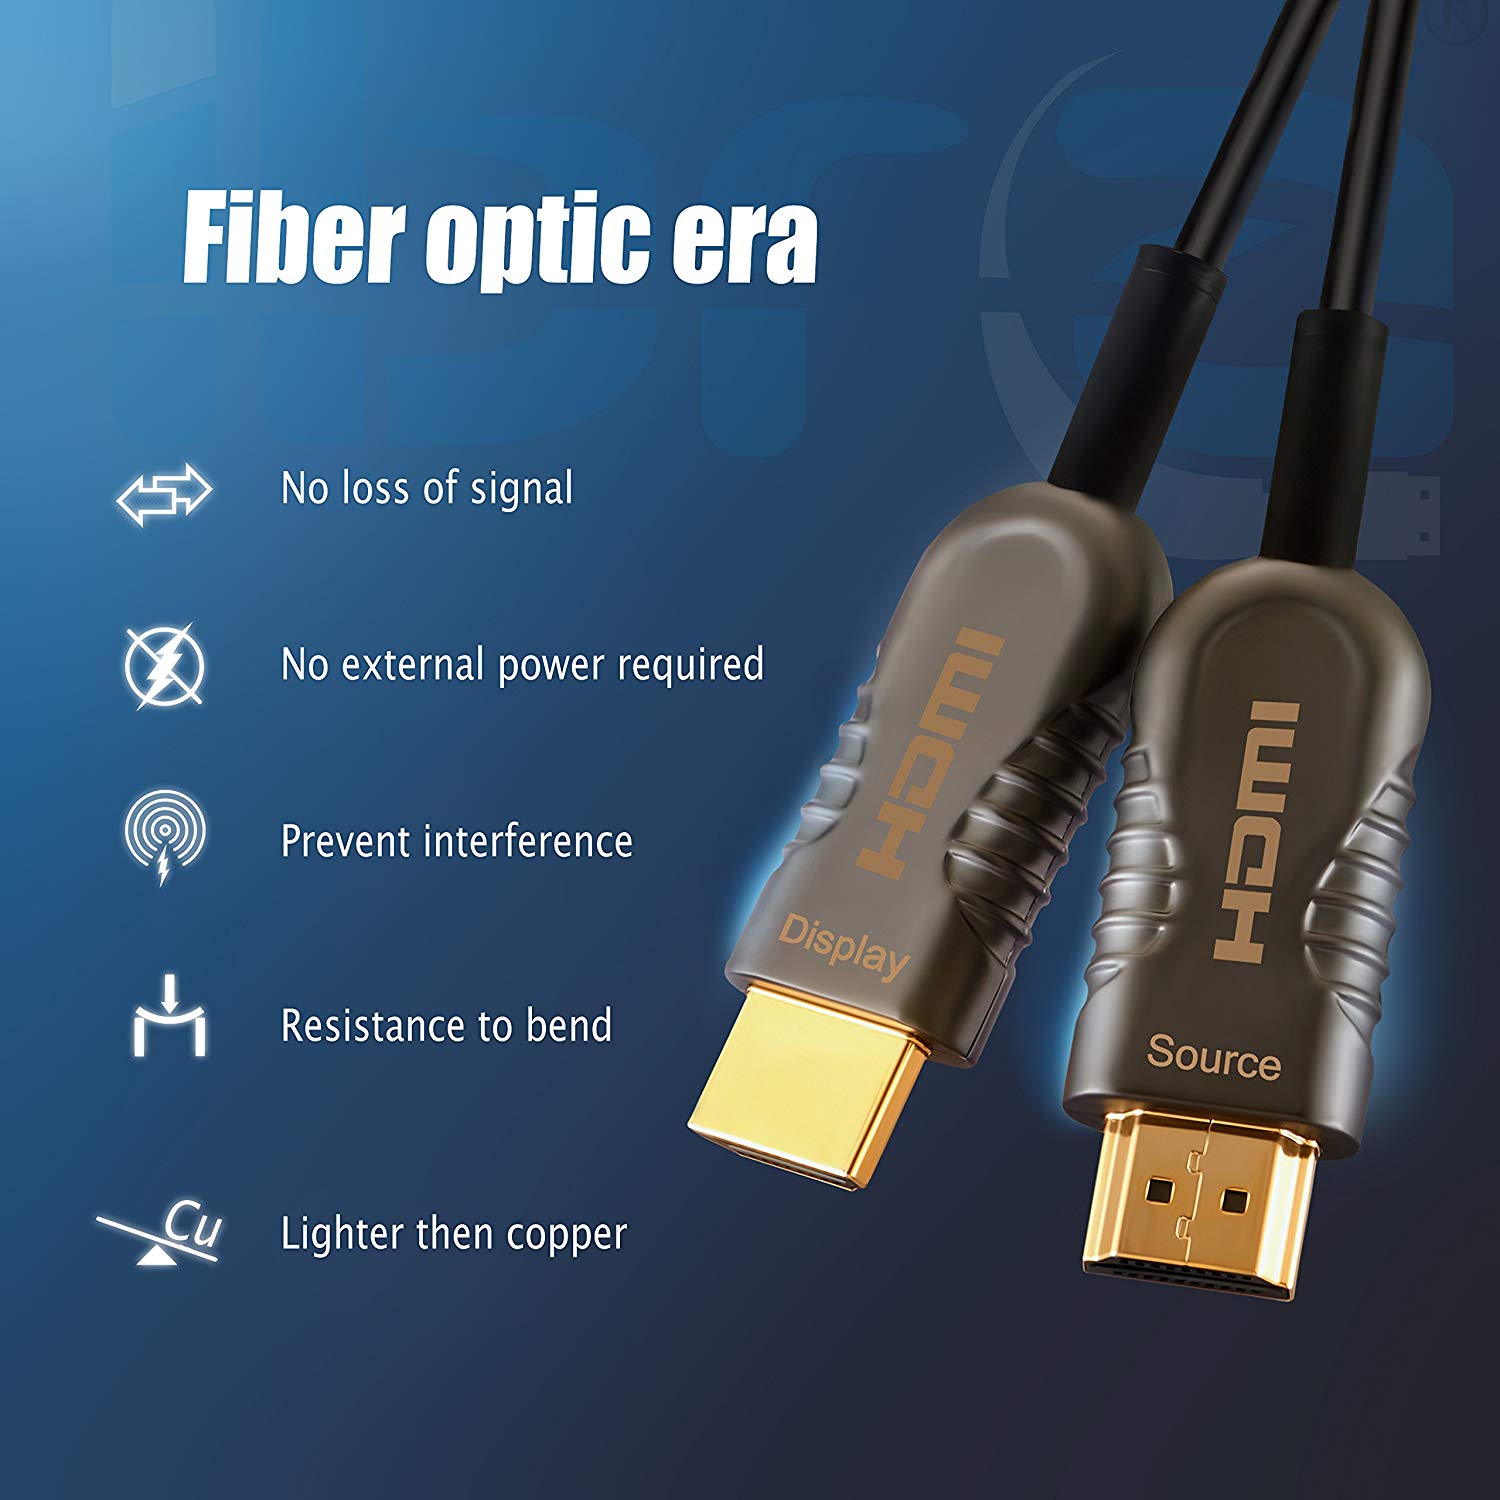 30M Fiber Optic HDMI High Speed Cable v2.0 18Gbps HDMI Lead Support 4K@60Hz/4:4:4/3D/4K HDR HDCP 2.2 for Apple TV, HDTV, Roku TV Box, Xbox One X, Home Theater, PS4, PS3 etc - IBRA OPTICAL HDMI Cable